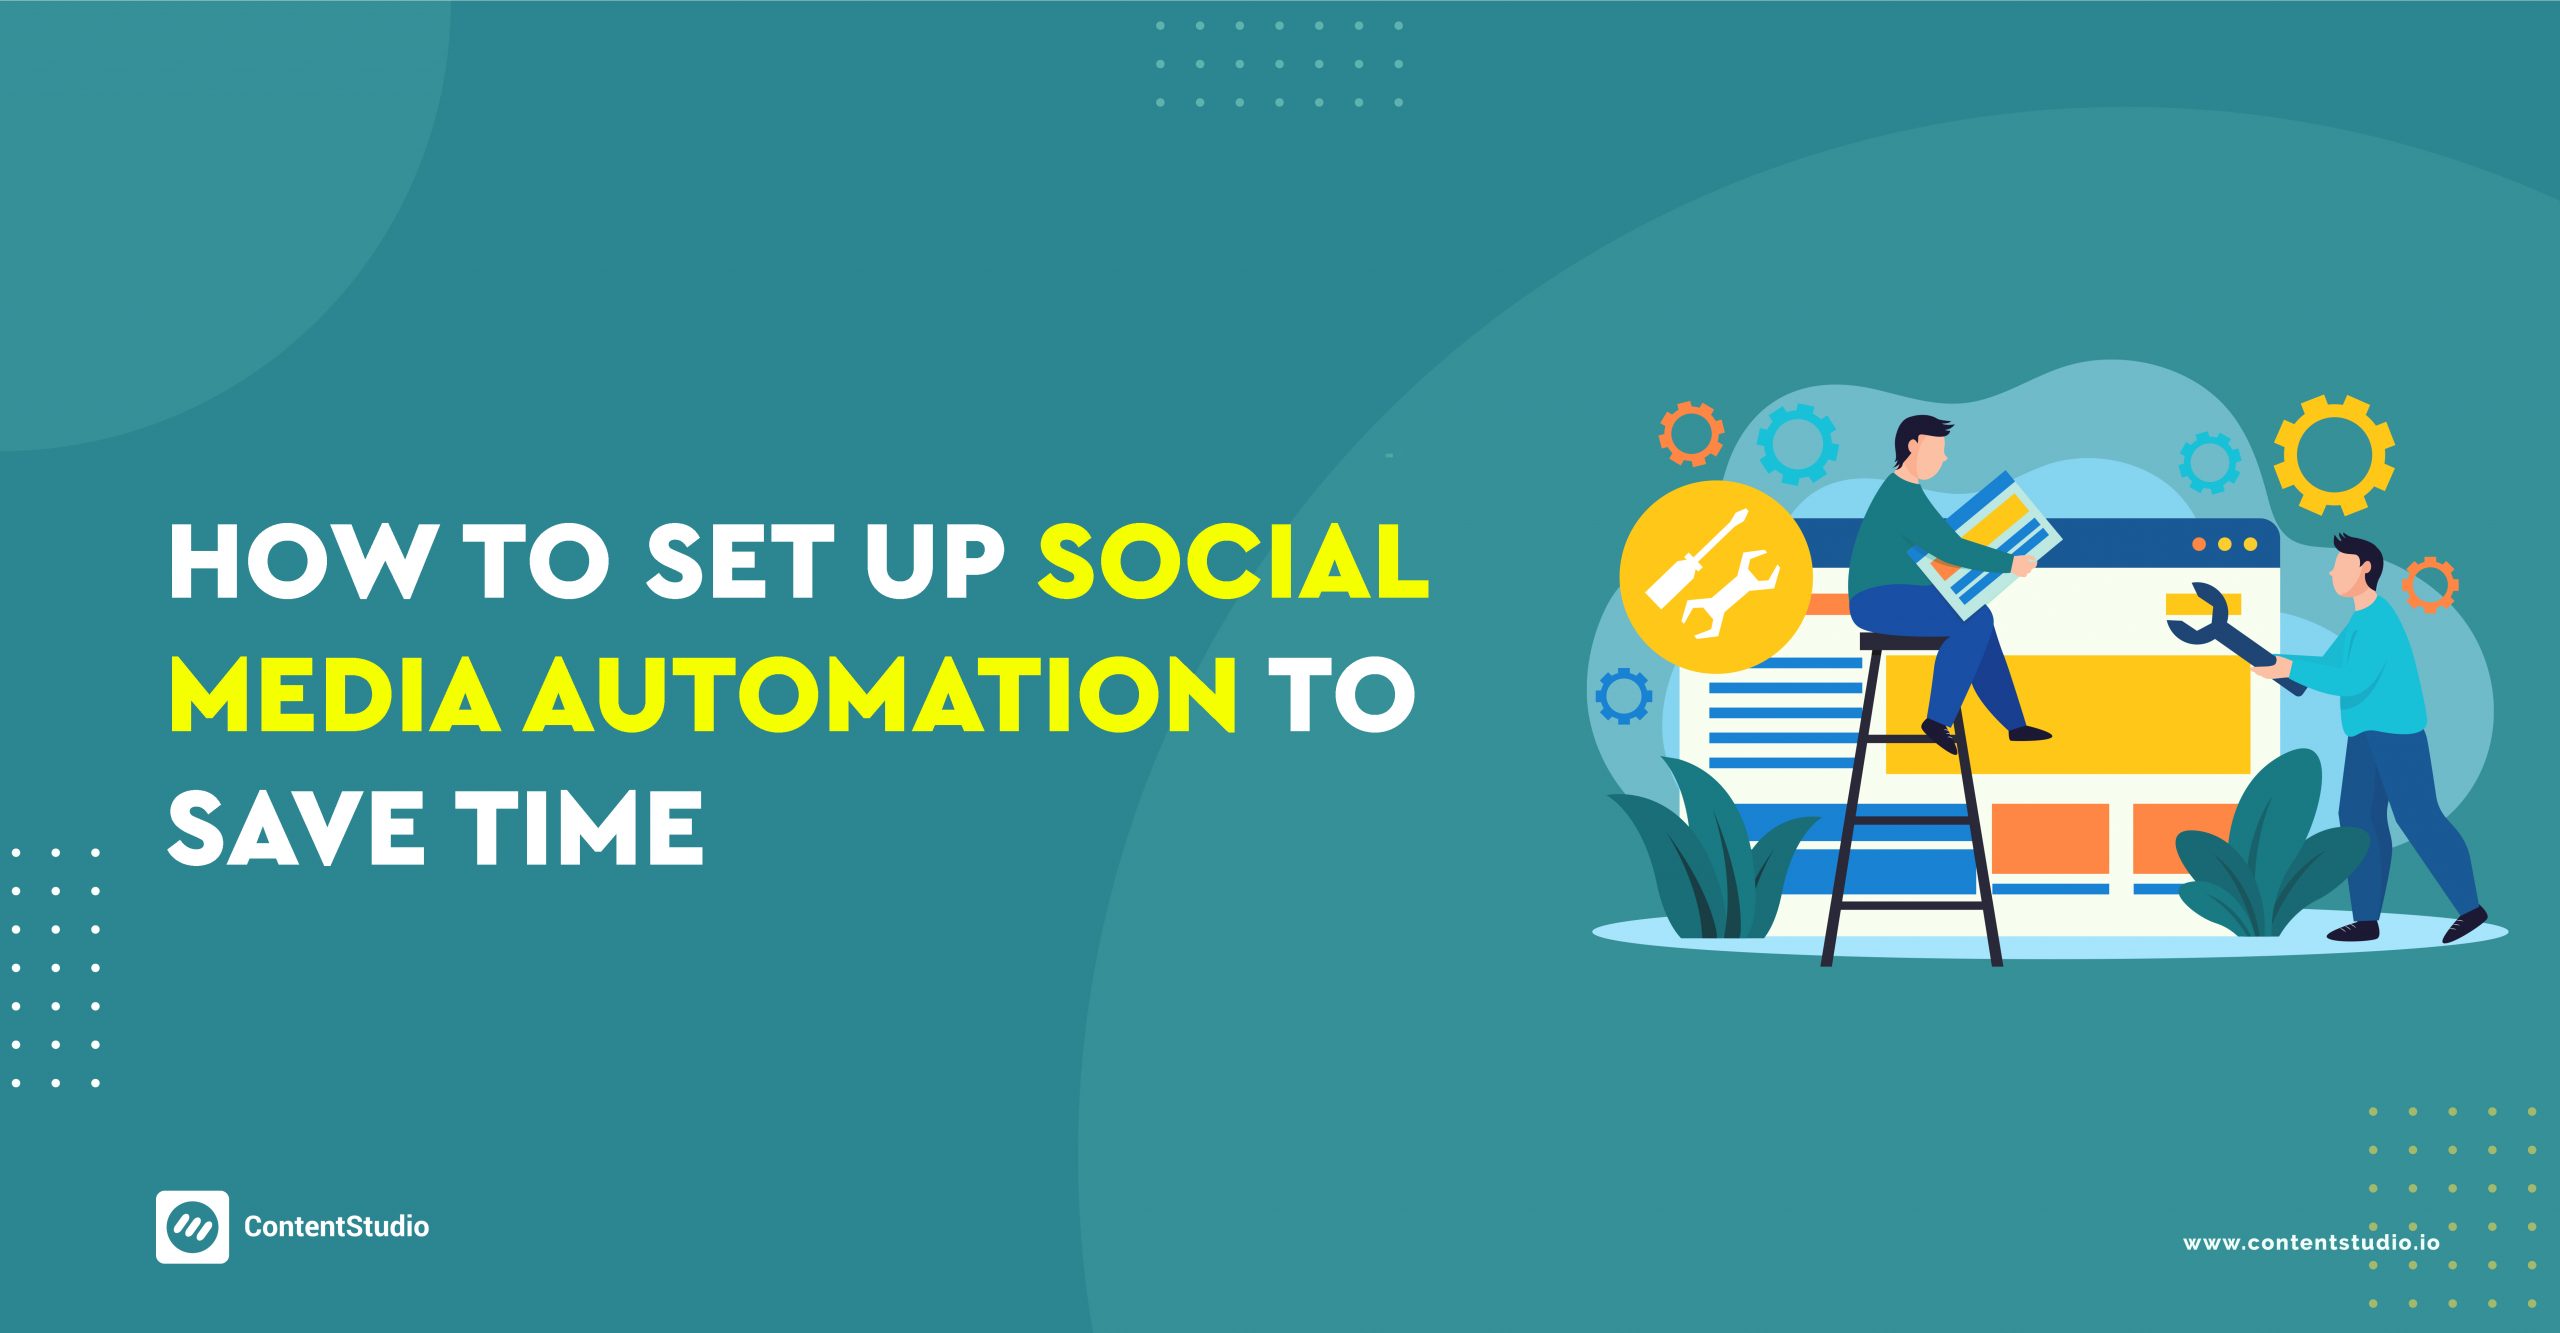 social media automation to save time